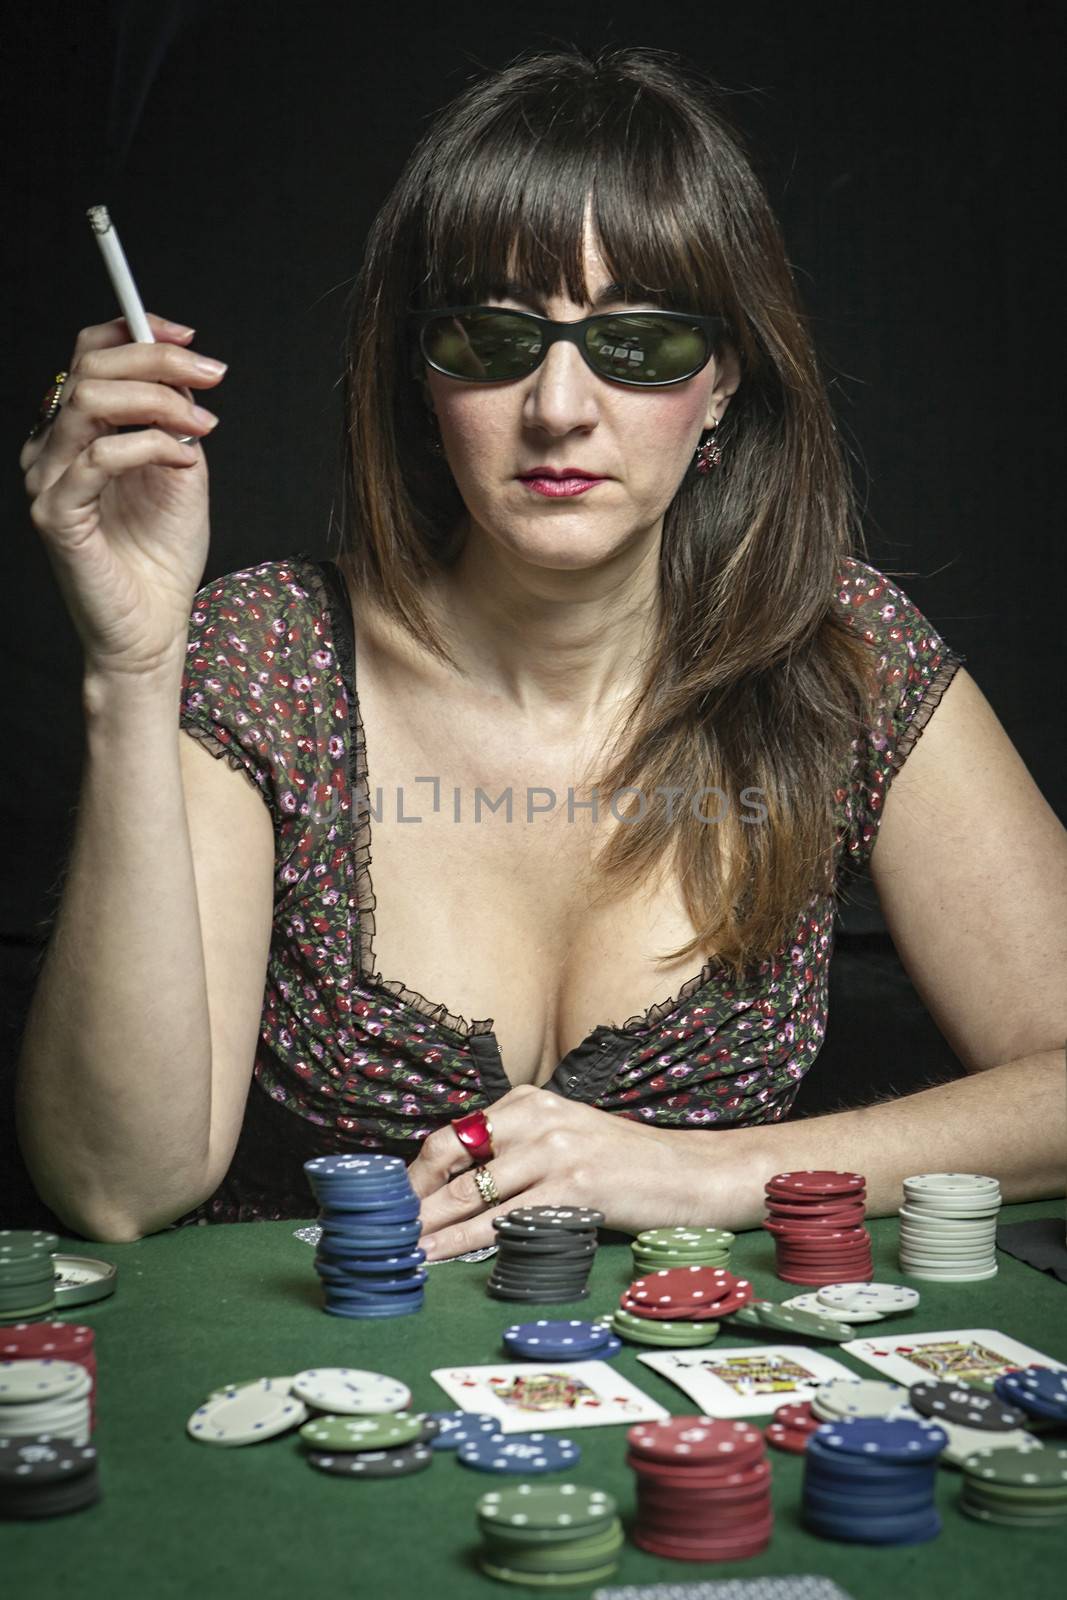 Attractive woman playing a game of poker